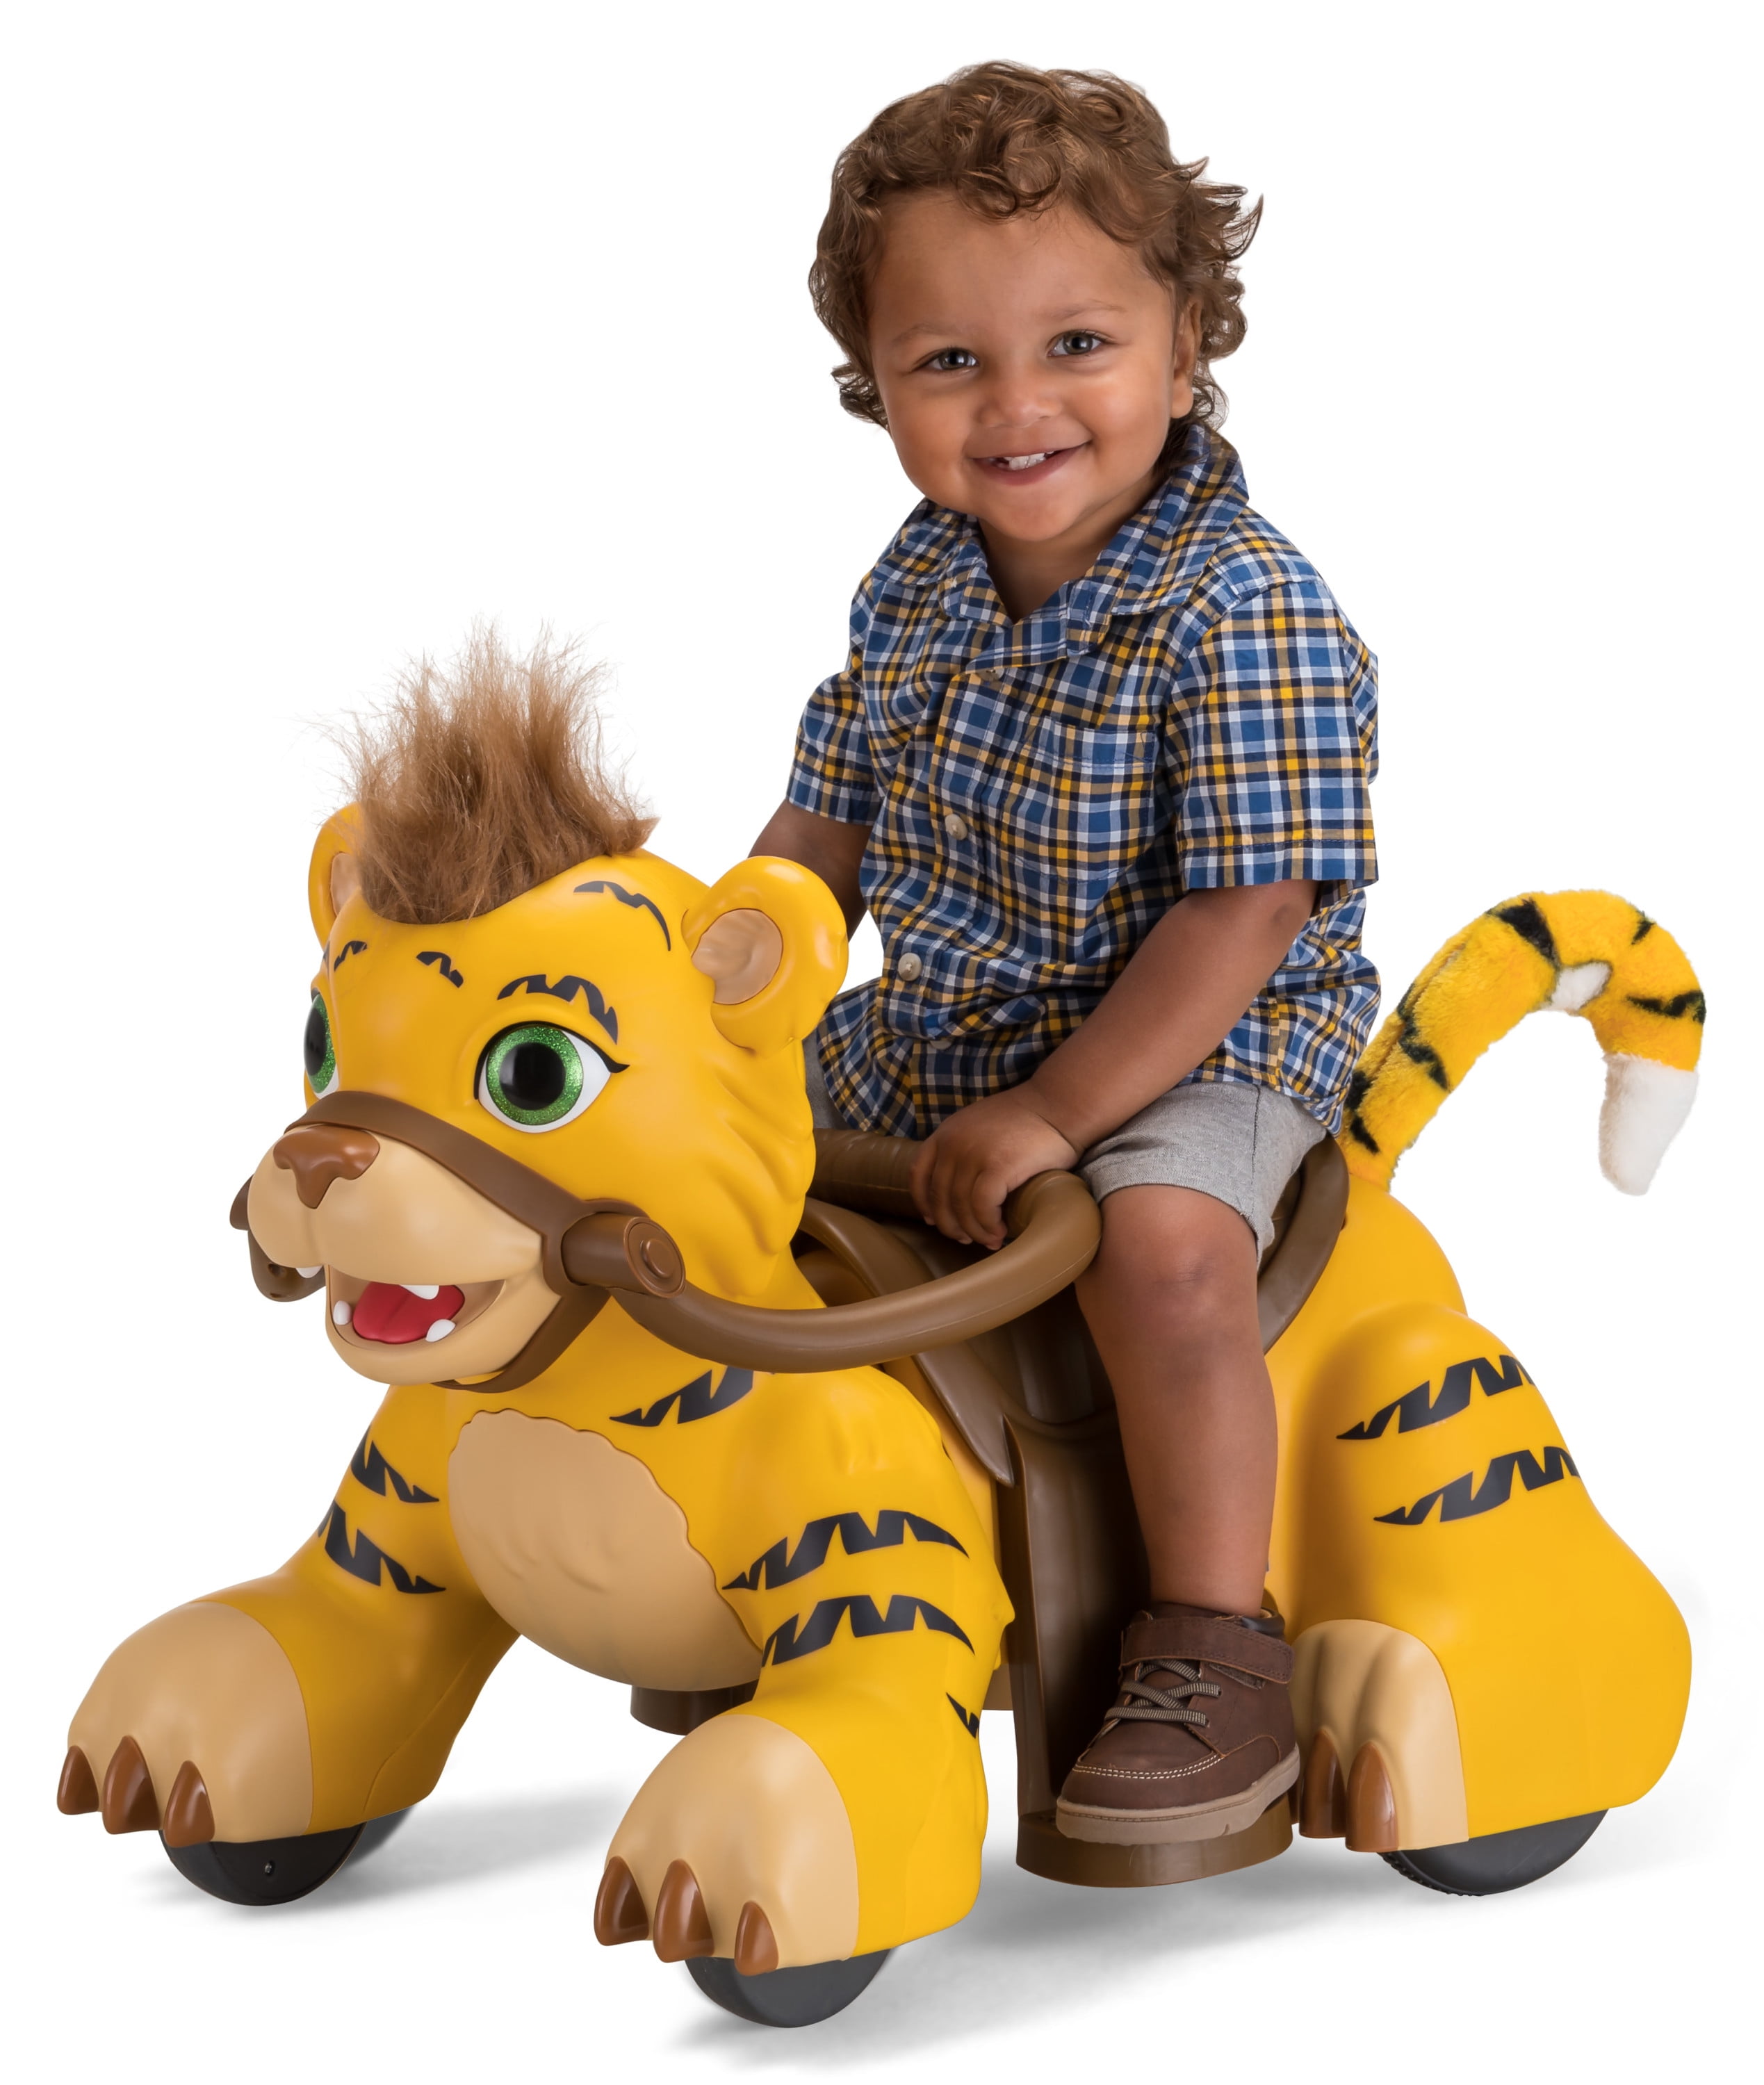 Rideamals Tiger Ride-On Toy by Kid Trax 